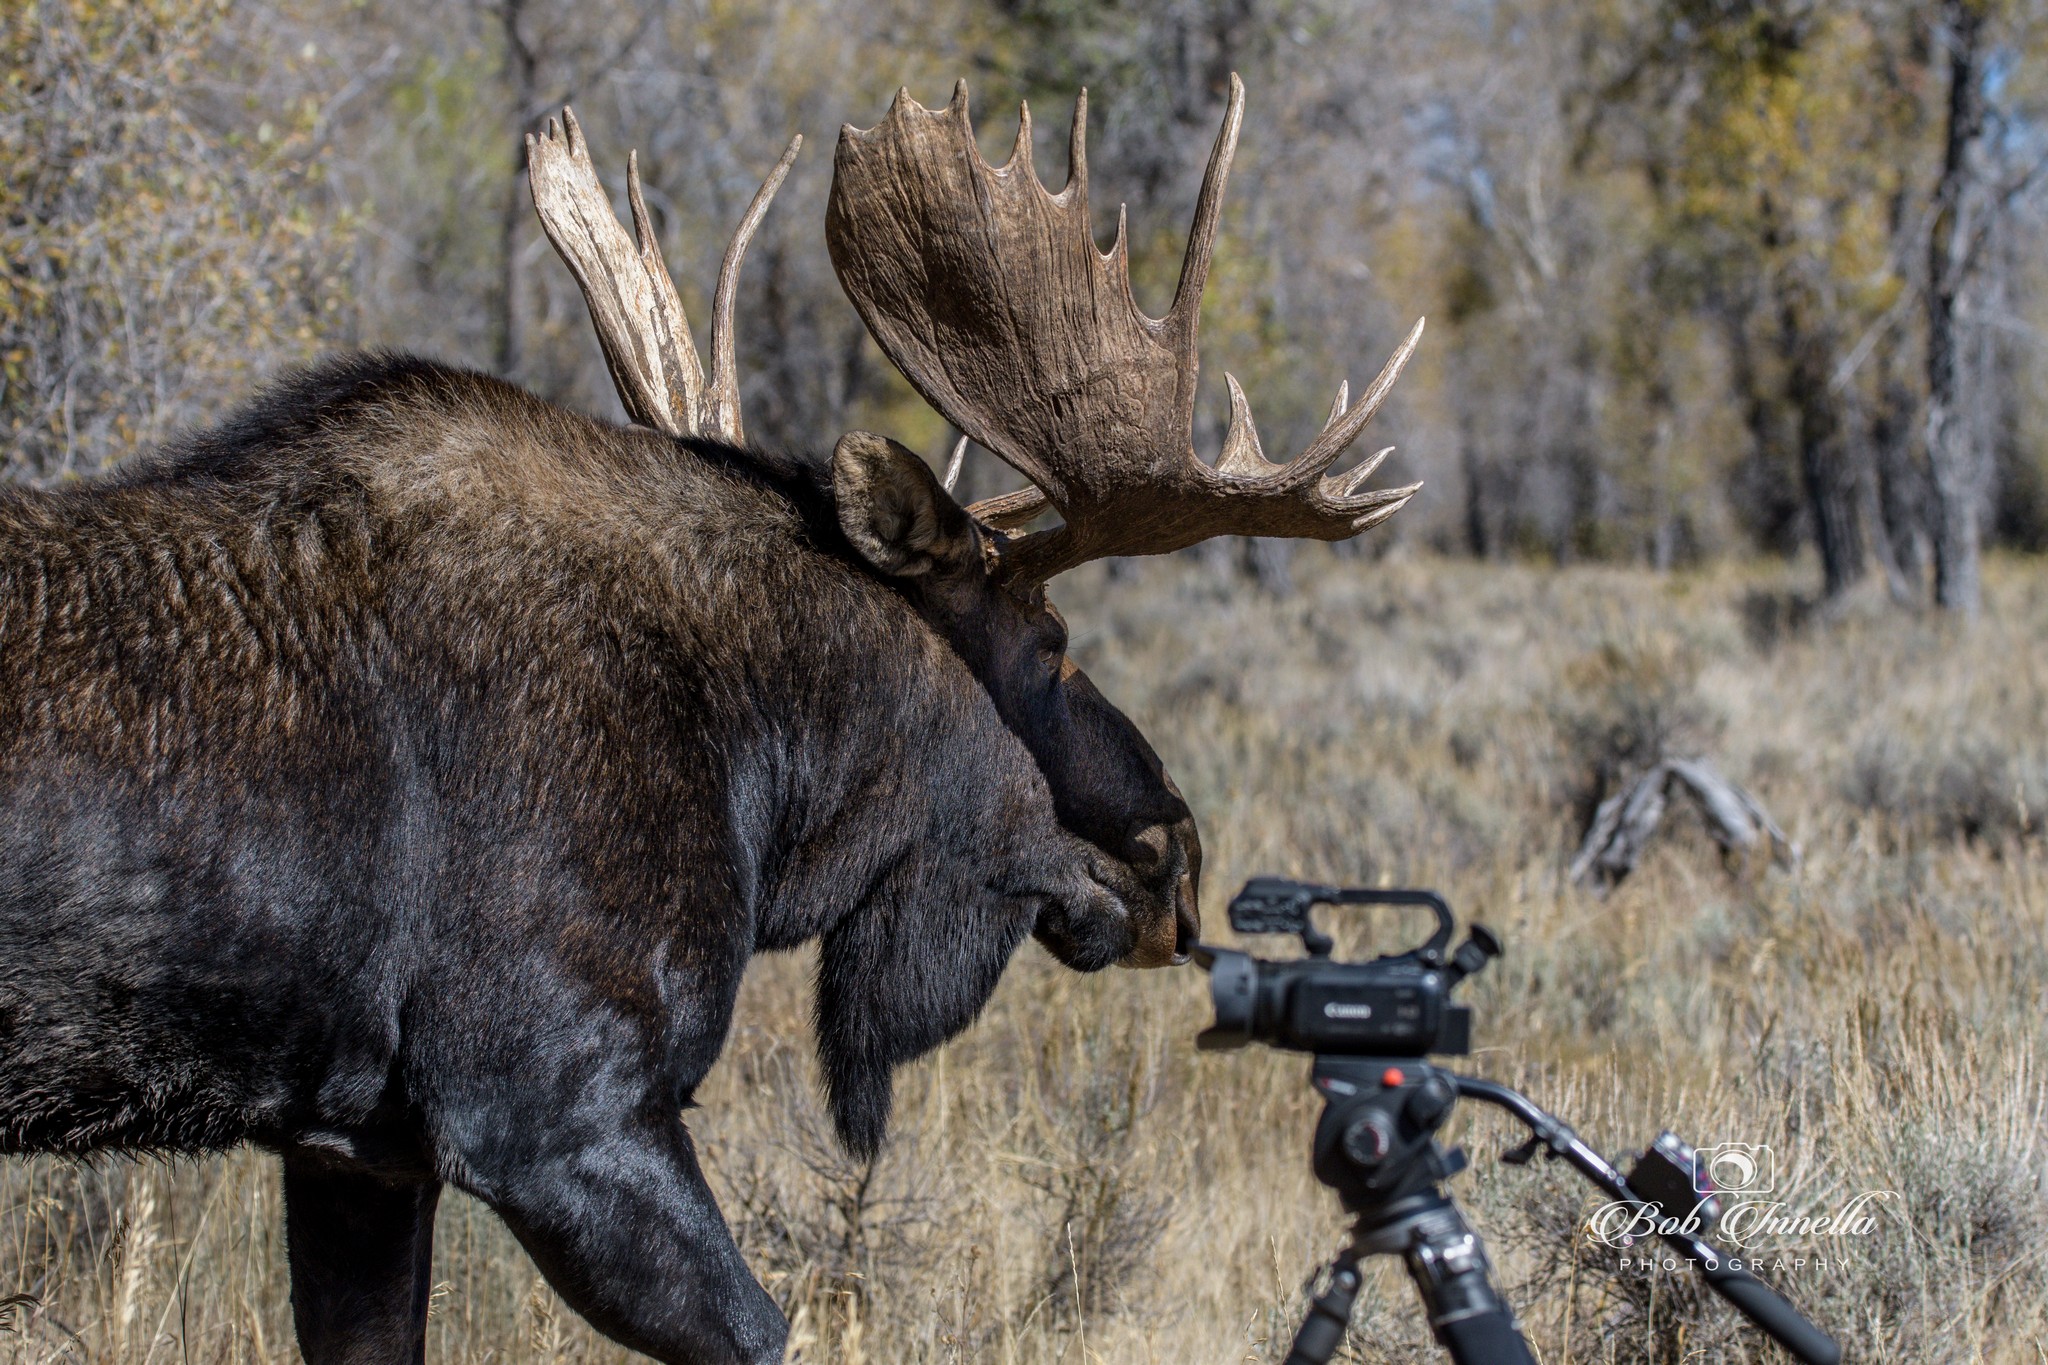 Moose_Camera I had to retreat back as this Bull Moose wanted My Space, Wyoming 2018 by Buckmaster